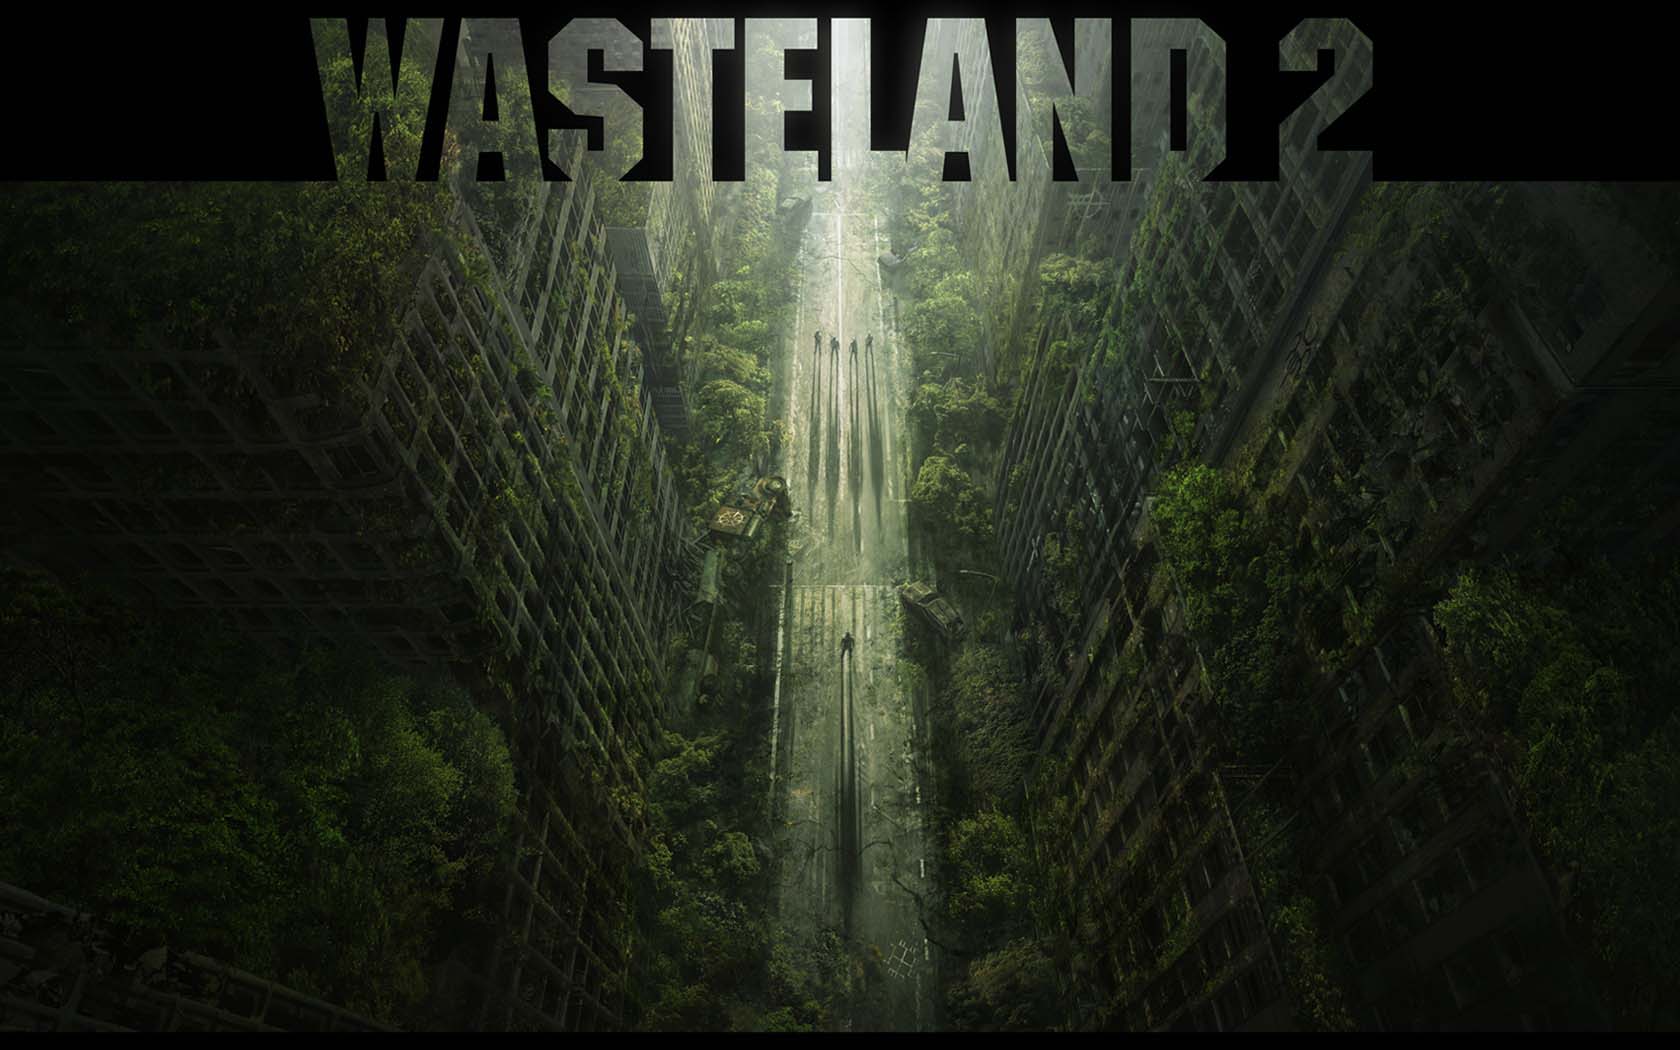 Better Visuals And Modding Tools Promised In Latest Wasteland 2